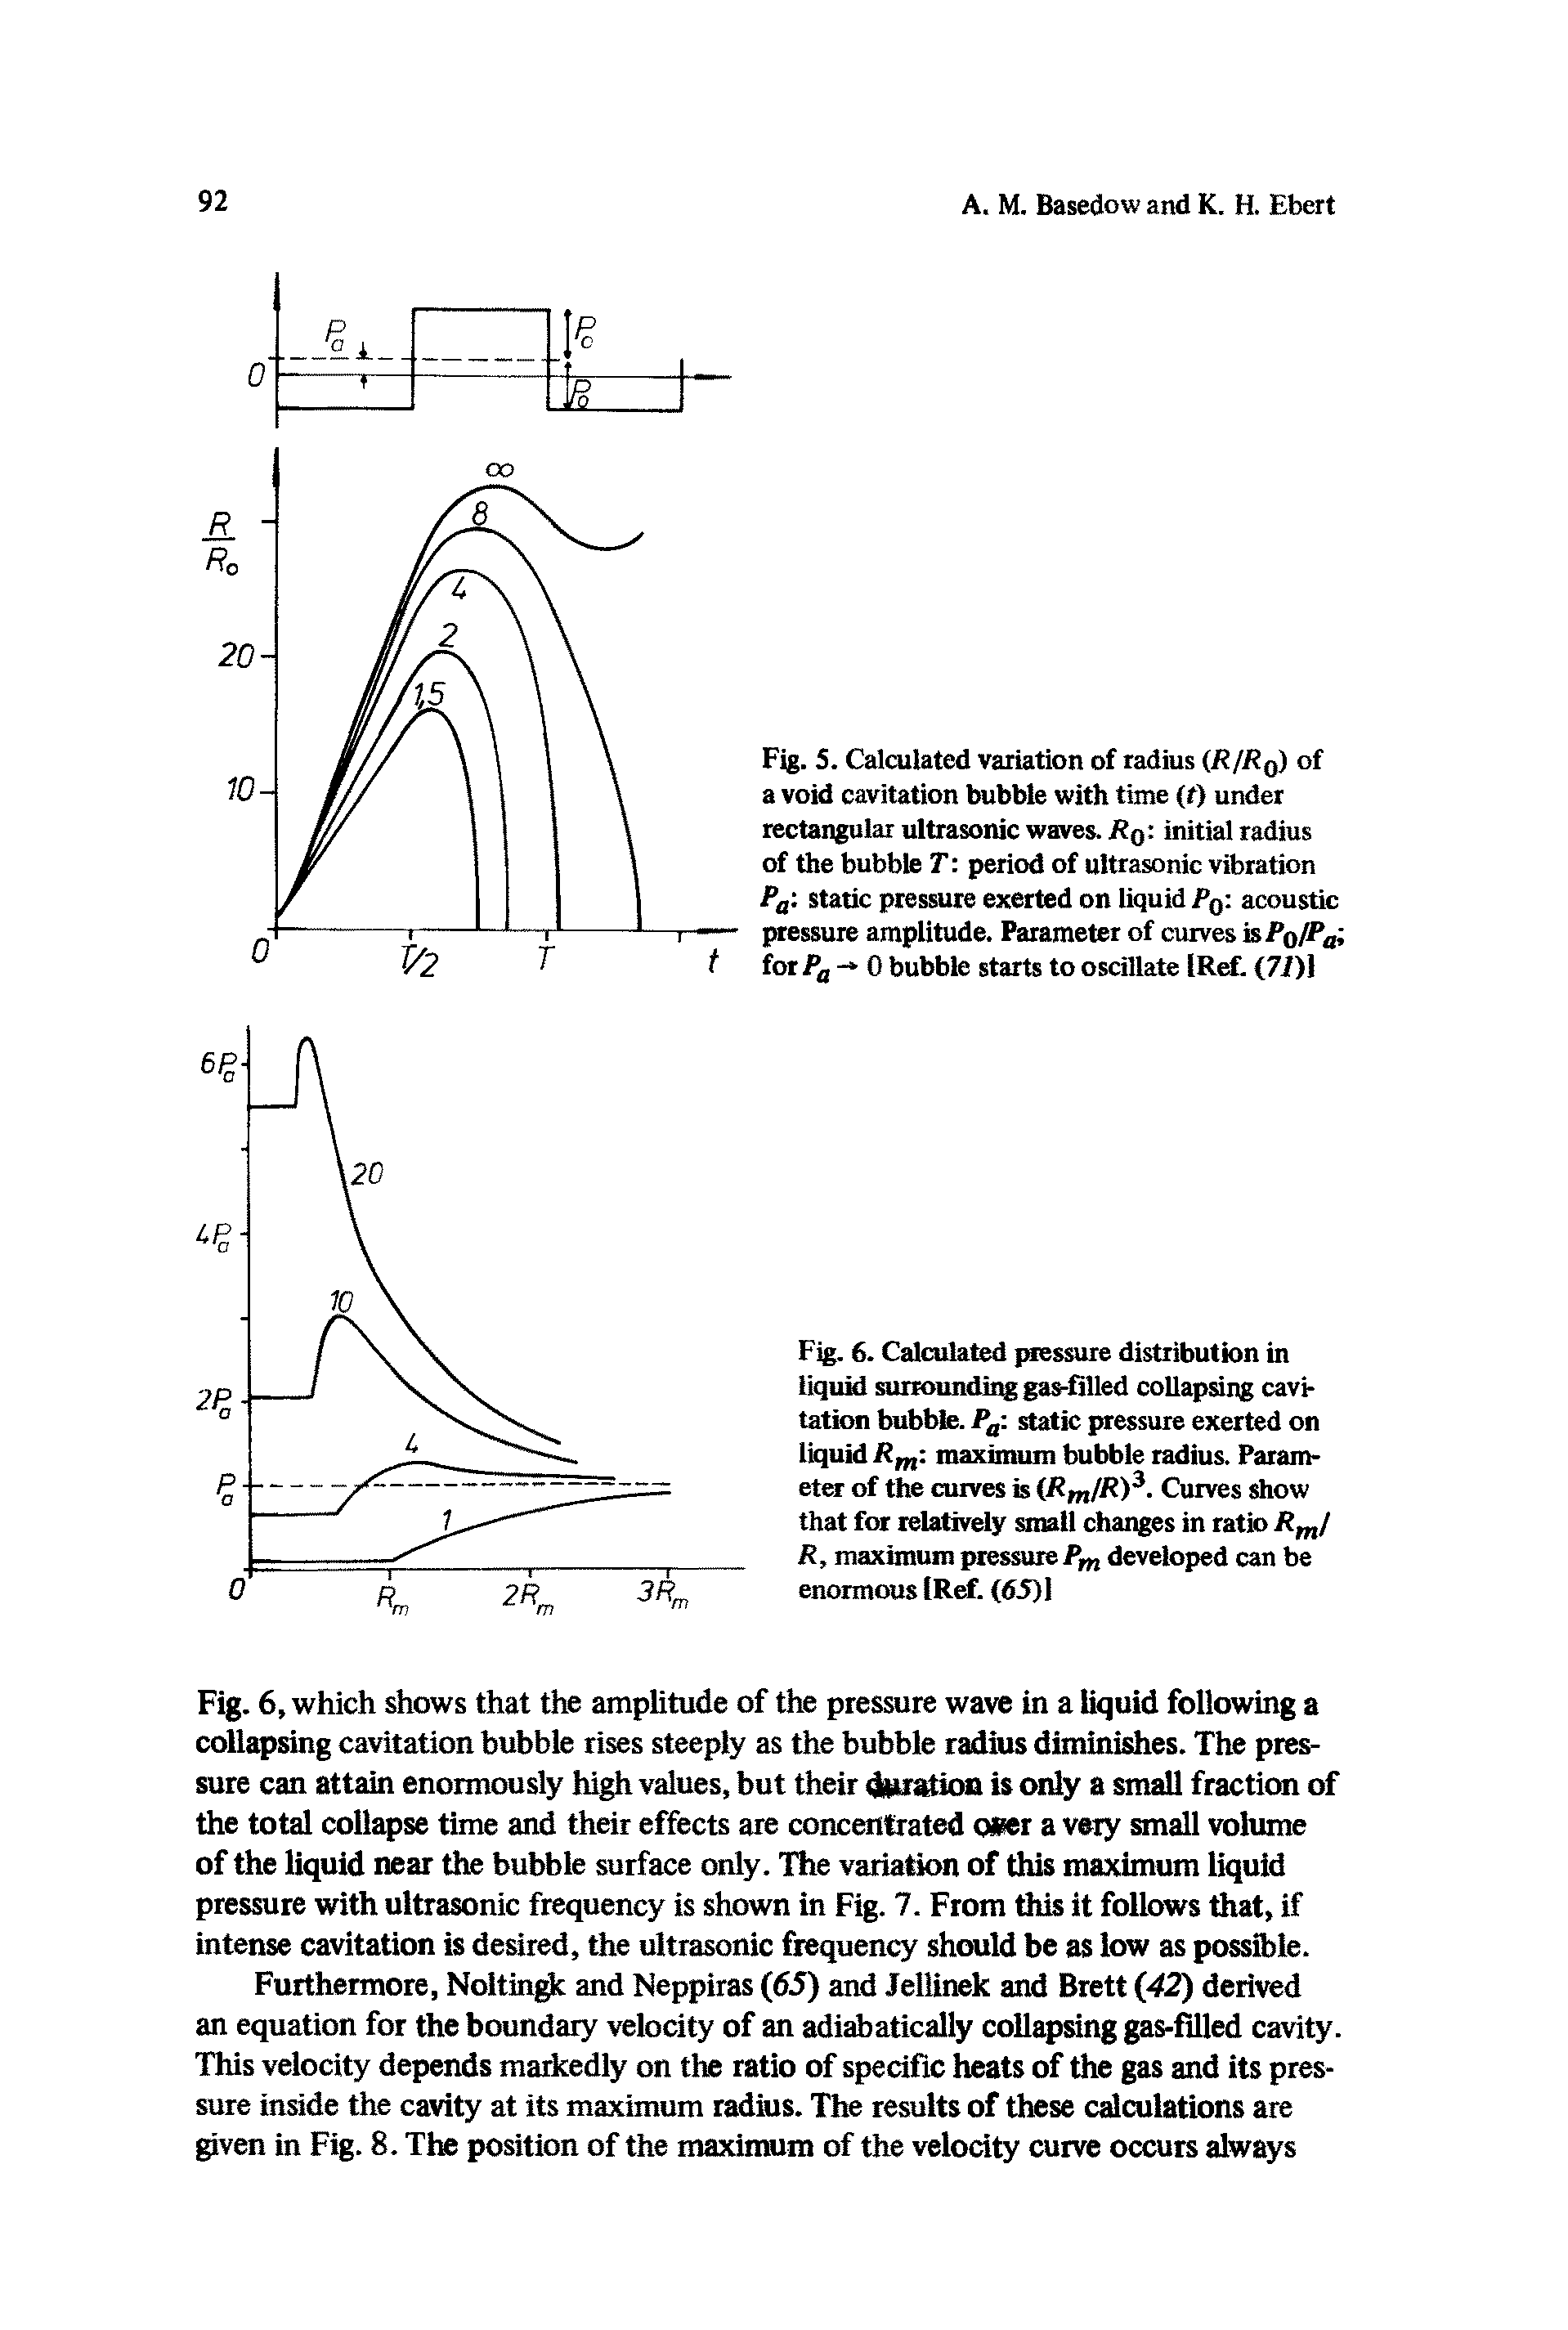 Fig. 5. Calculated variation of radius R/R of a void cavitation bubble with time (r) under rectangular ultrasonic waves. Rqi initial radius of the bubble T period of ultrasonic vibration Pg. static pressure exerted on liquid Pqi acoustic pressiue amplitude. Parameter of curves i PqIP, for/U 0 bubble starts to oscillate IR (7/)]...